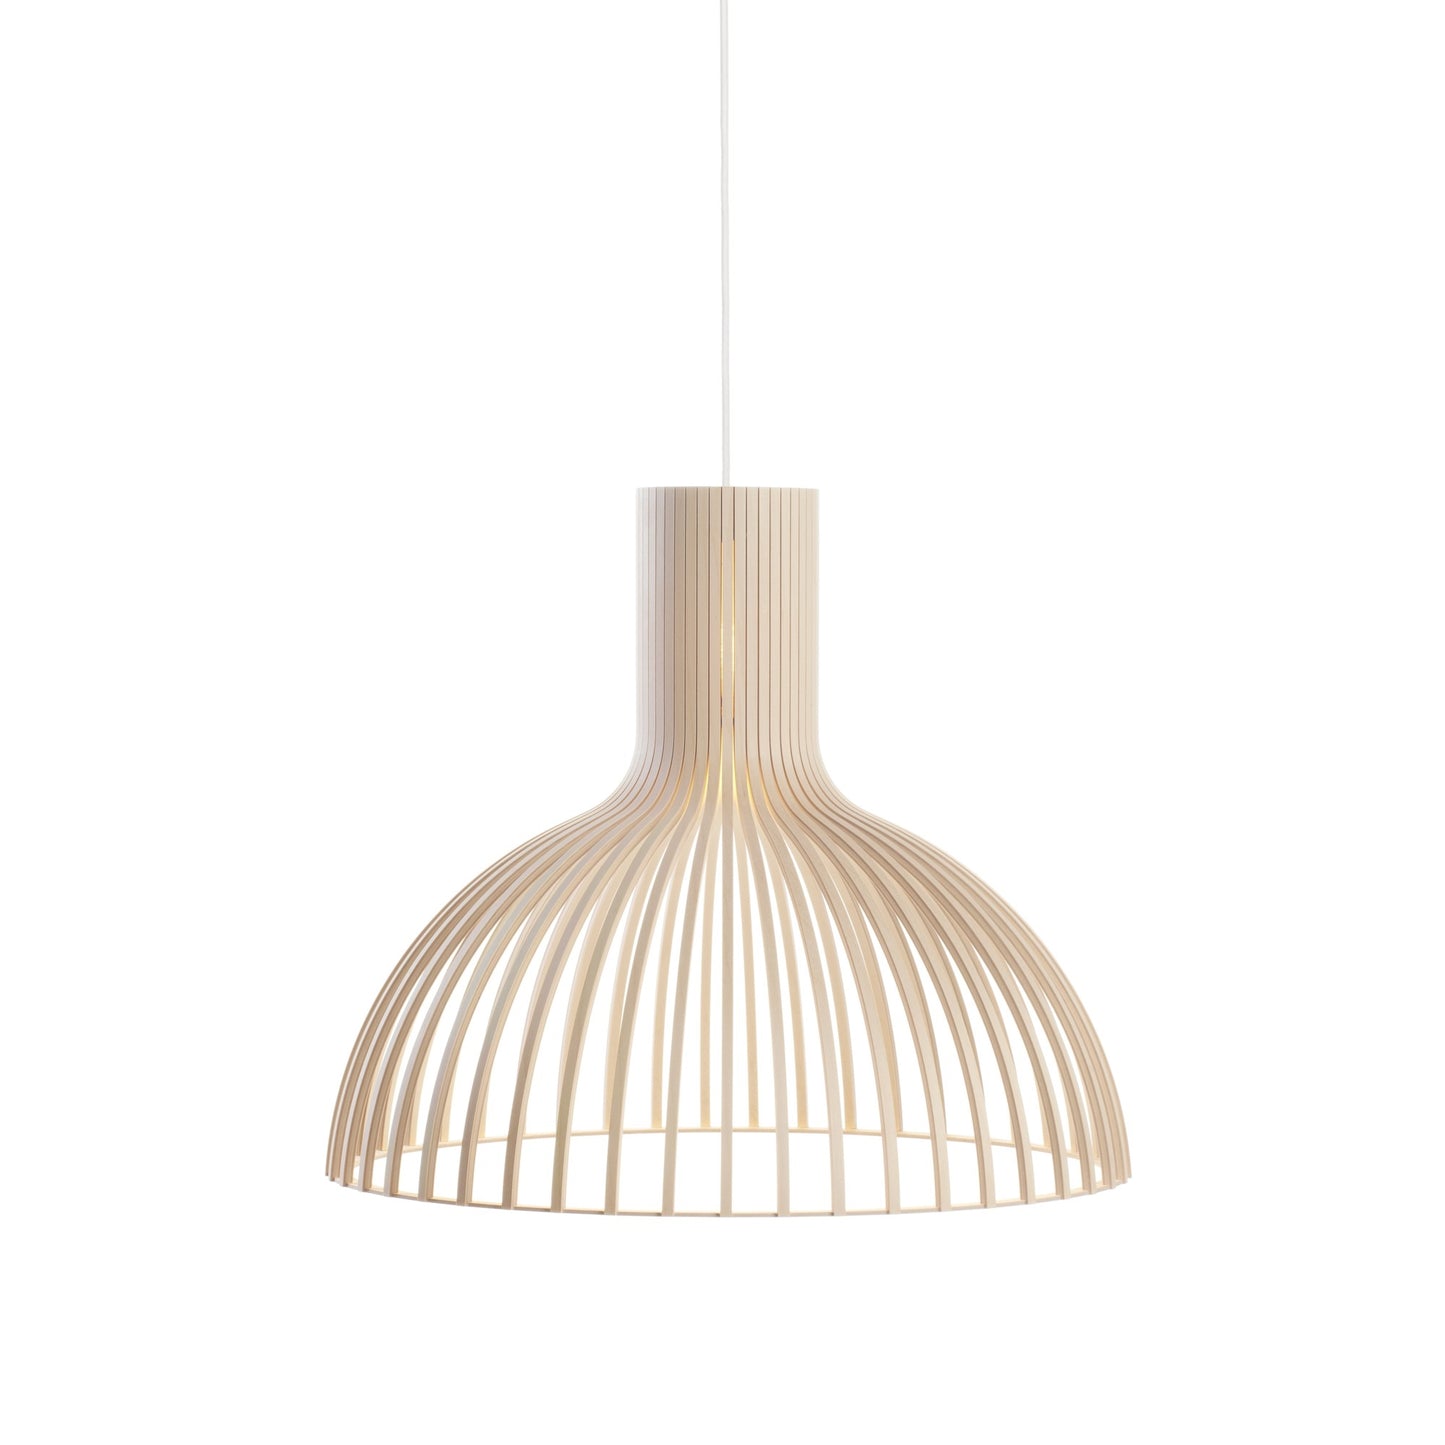 Victo 4250 Pendant Lamp by Secto #Birch